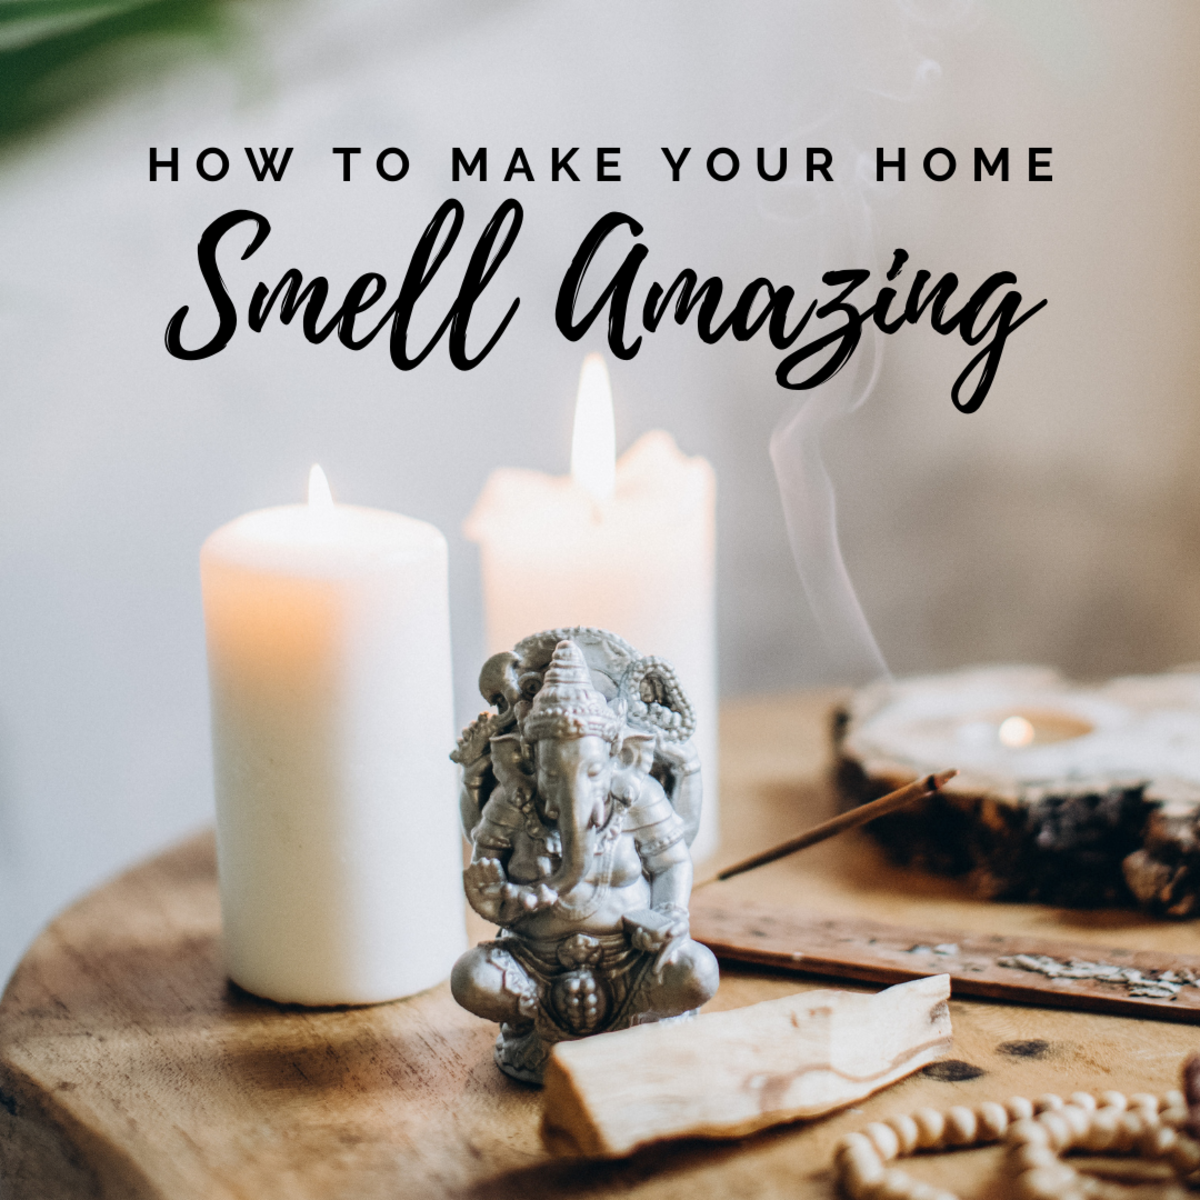 Everybody wants their home to smell as good as it looks!